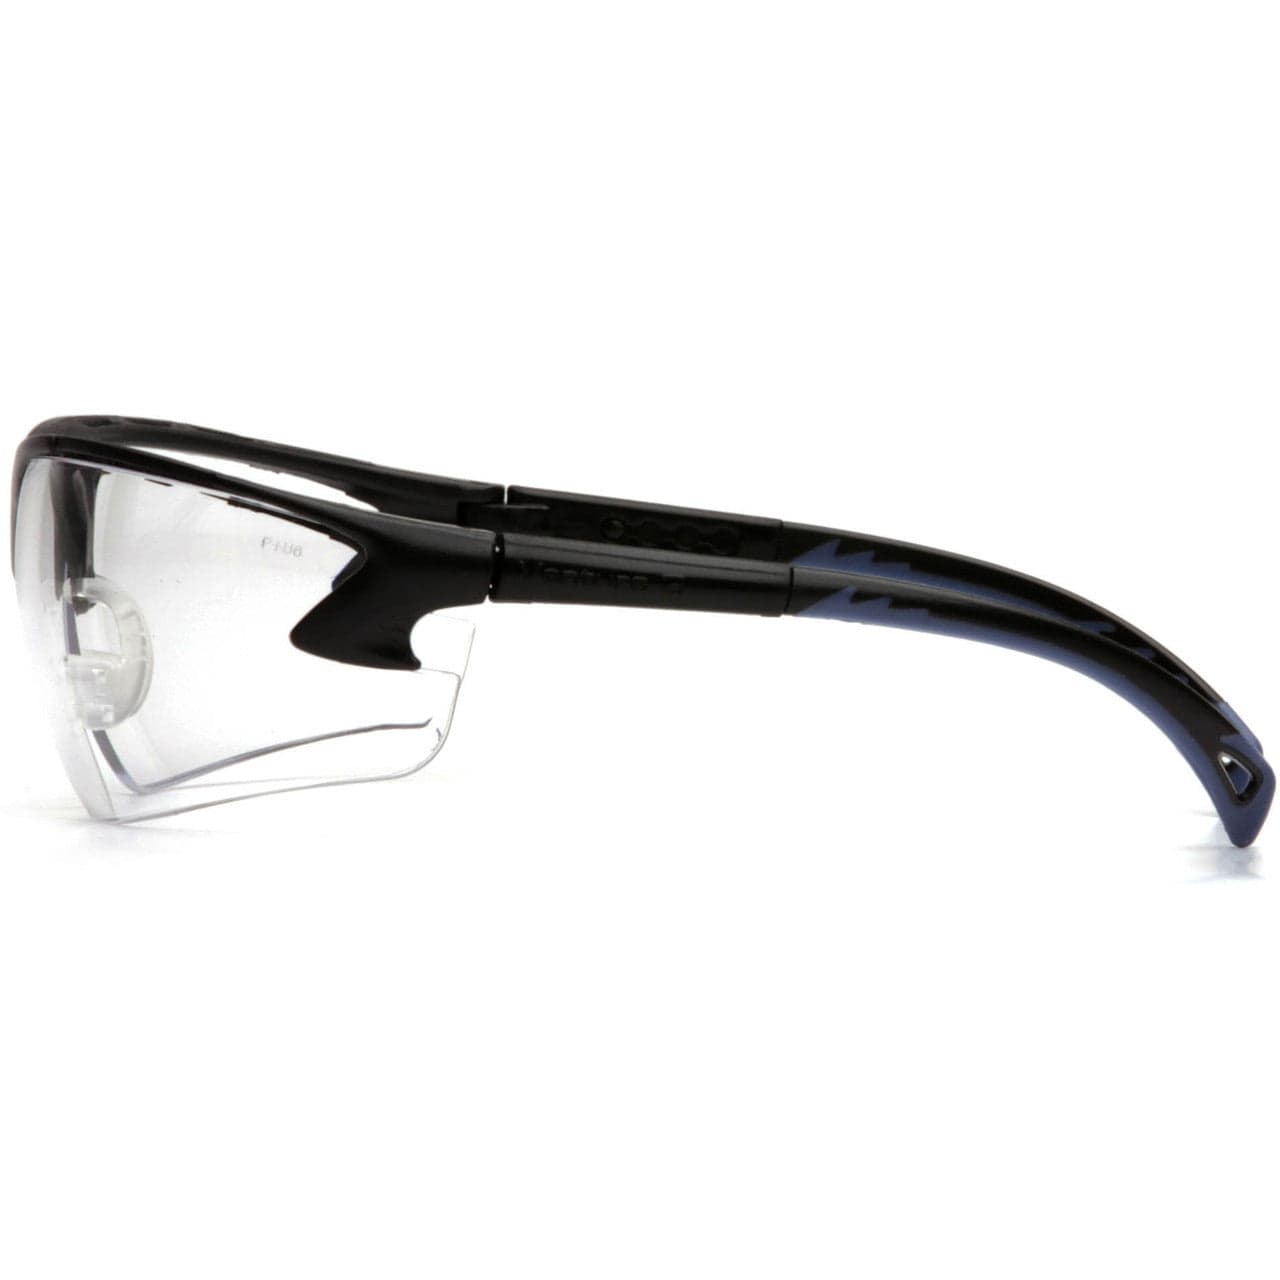 Pyramex Venture 3 Safety Glasses with Black Frame and Clear Anti-Fog Lens SB5710DT Side View